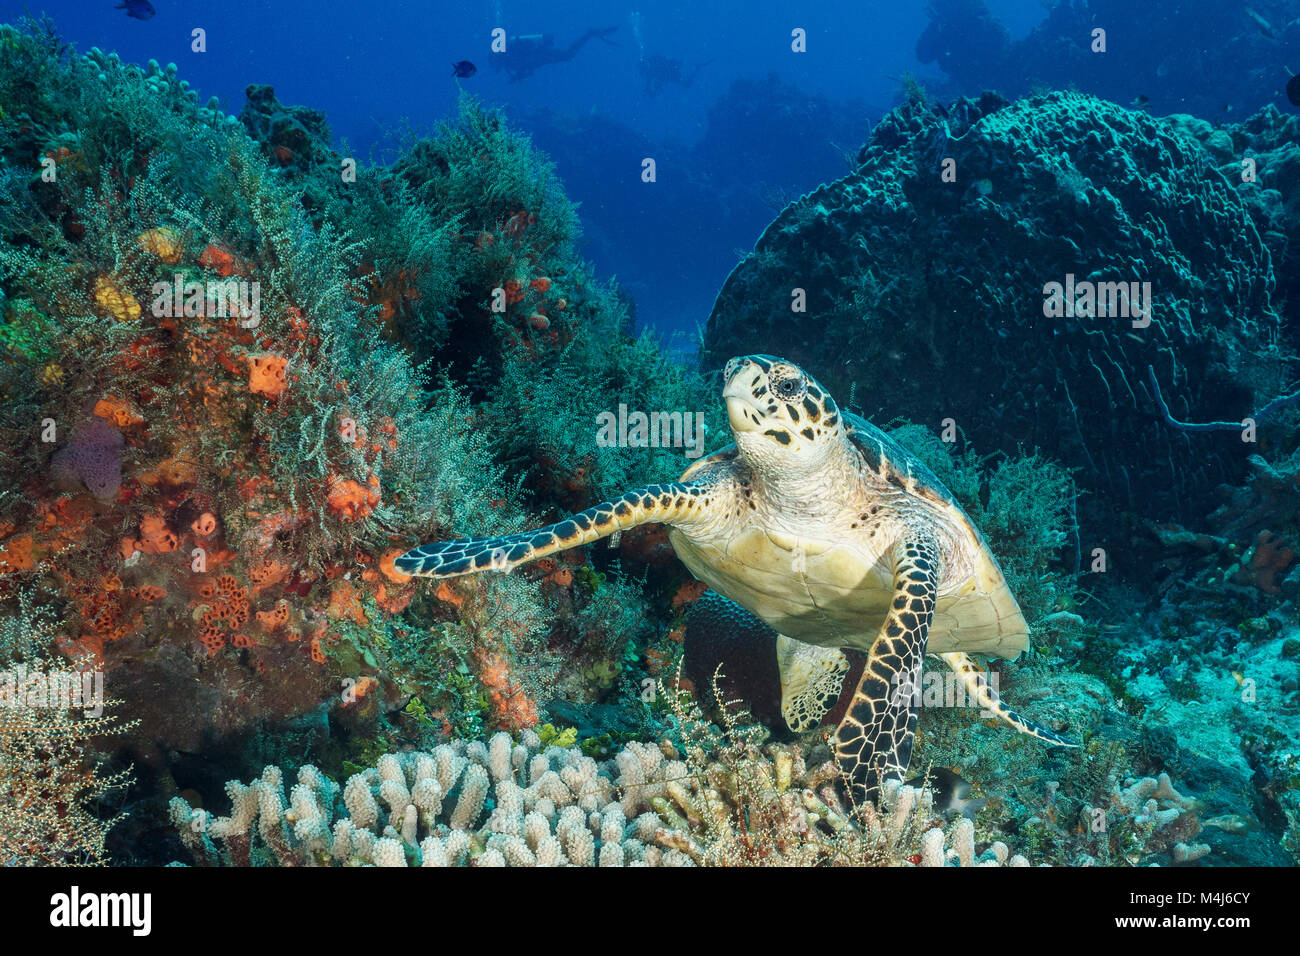 Hawksbill Turtle on Coral Reef Stock Photo